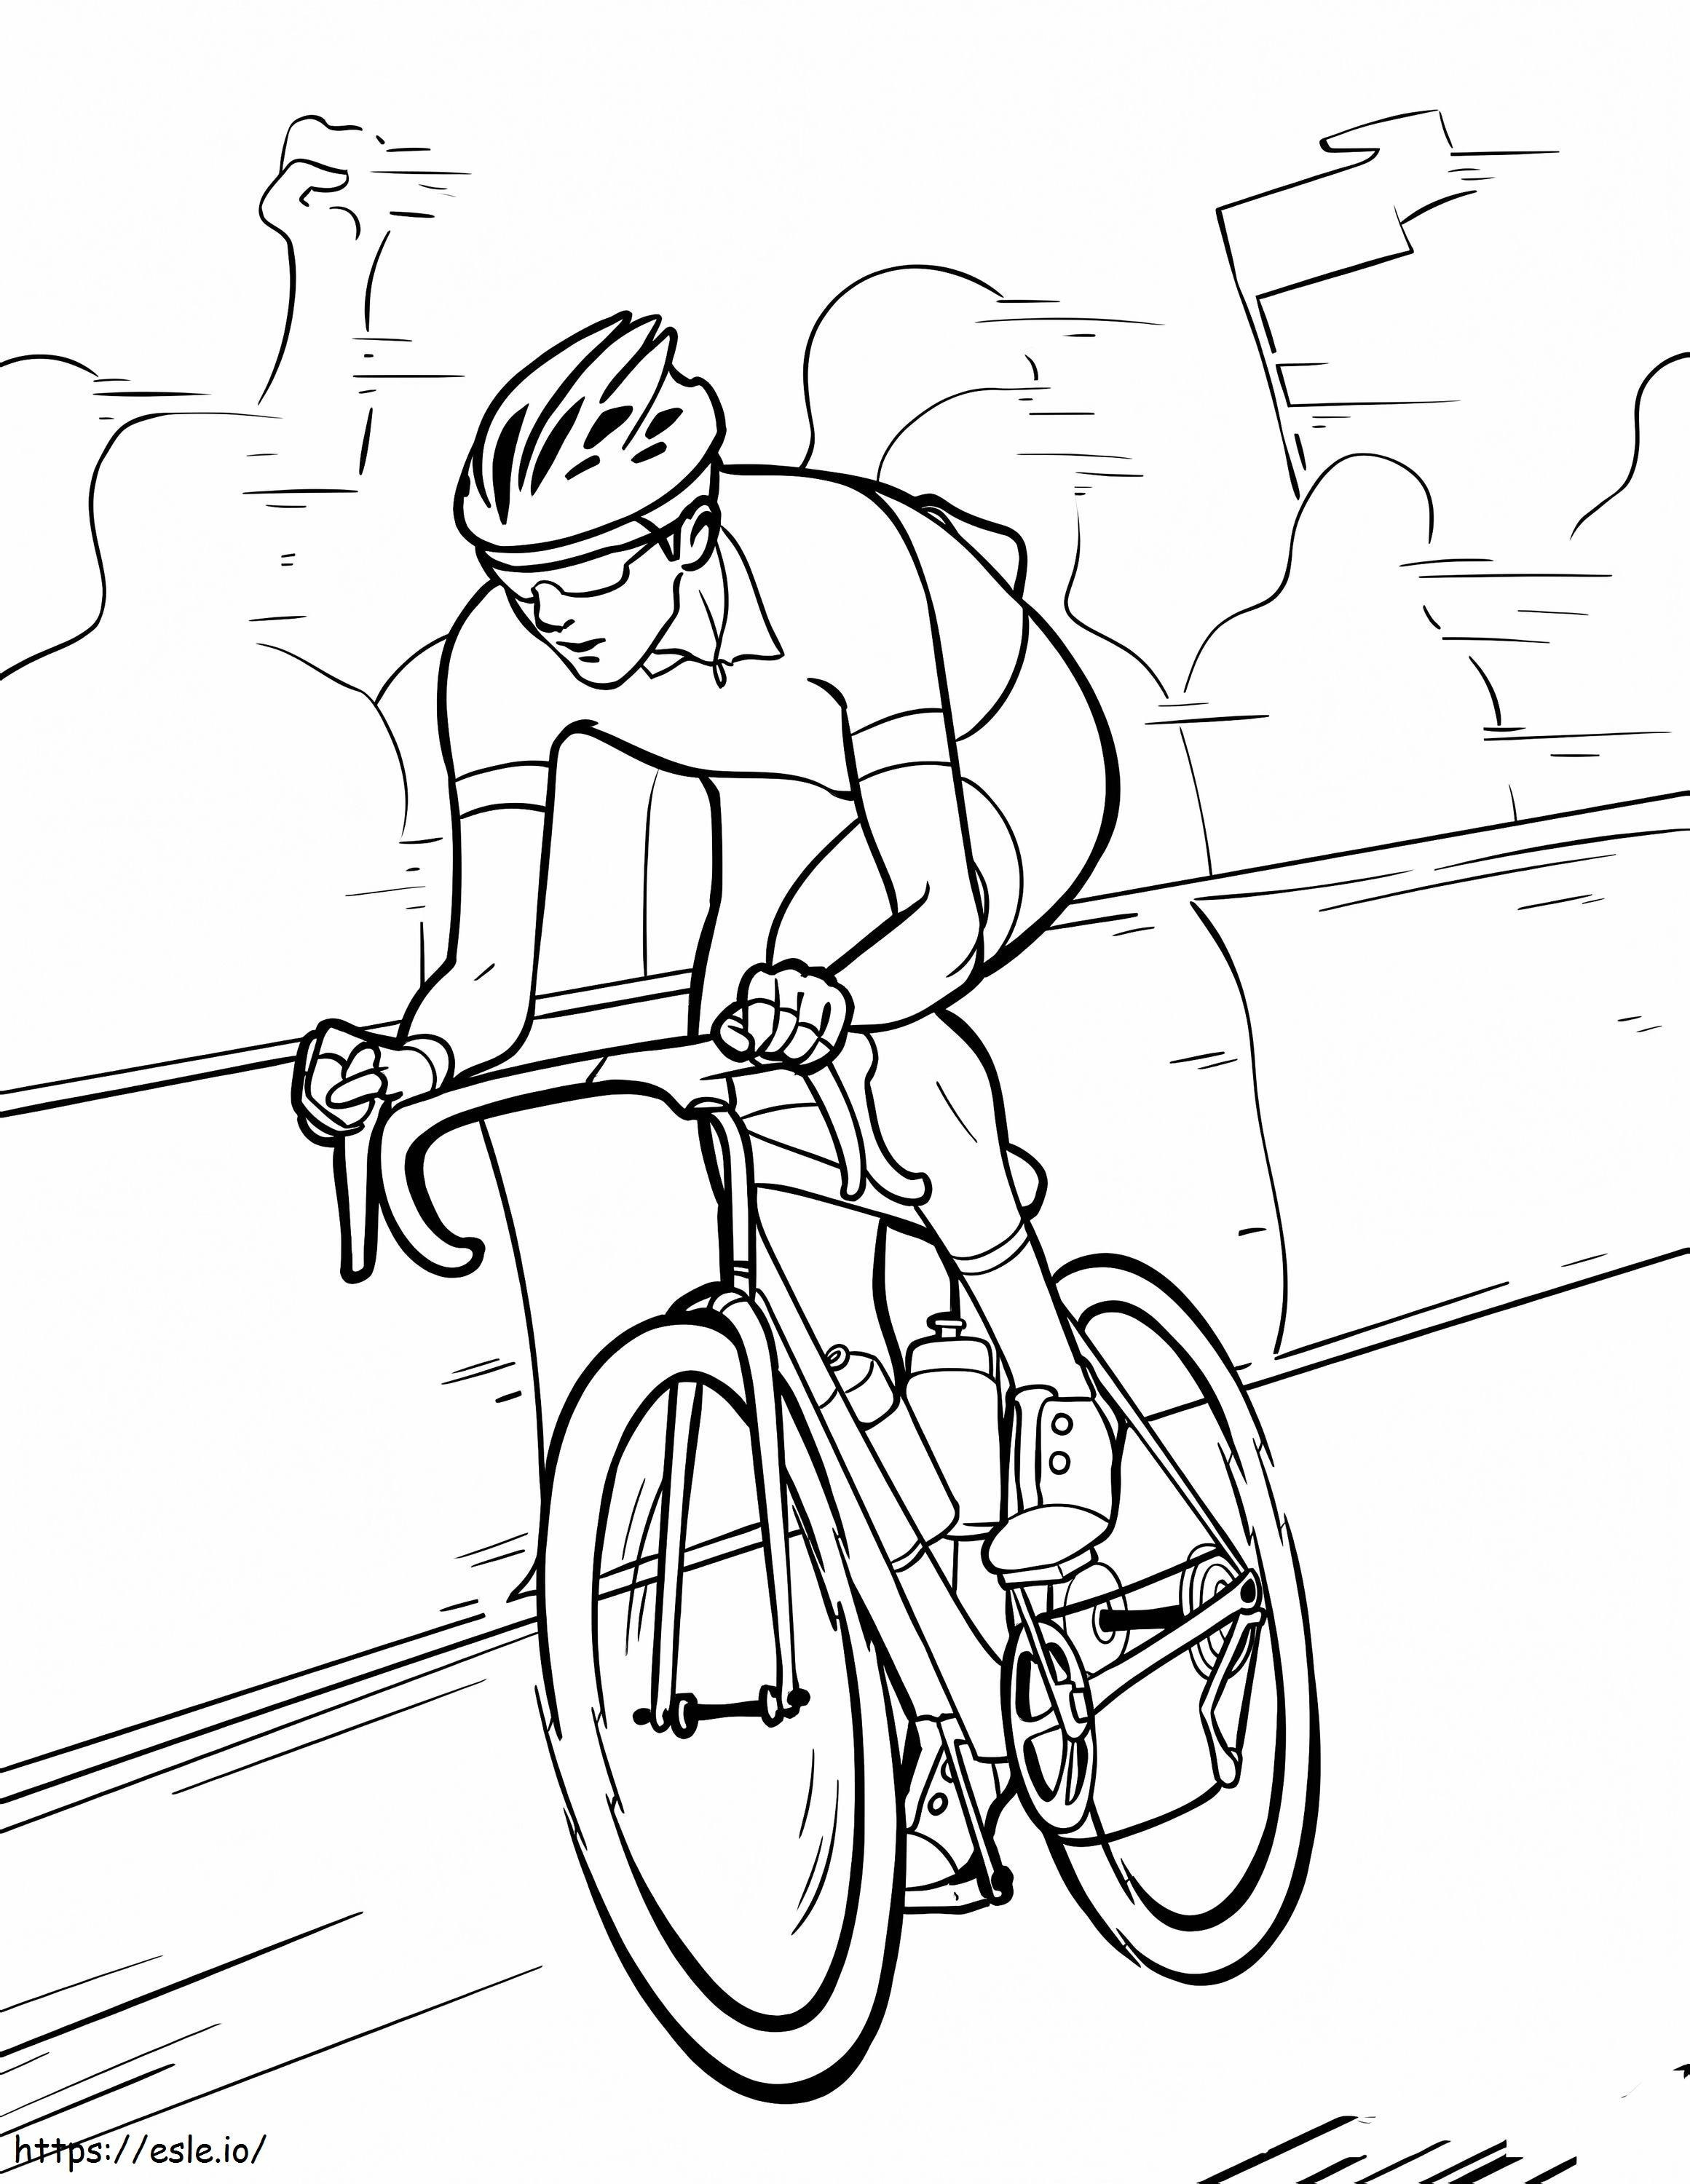 Cycling Athlete coloring page